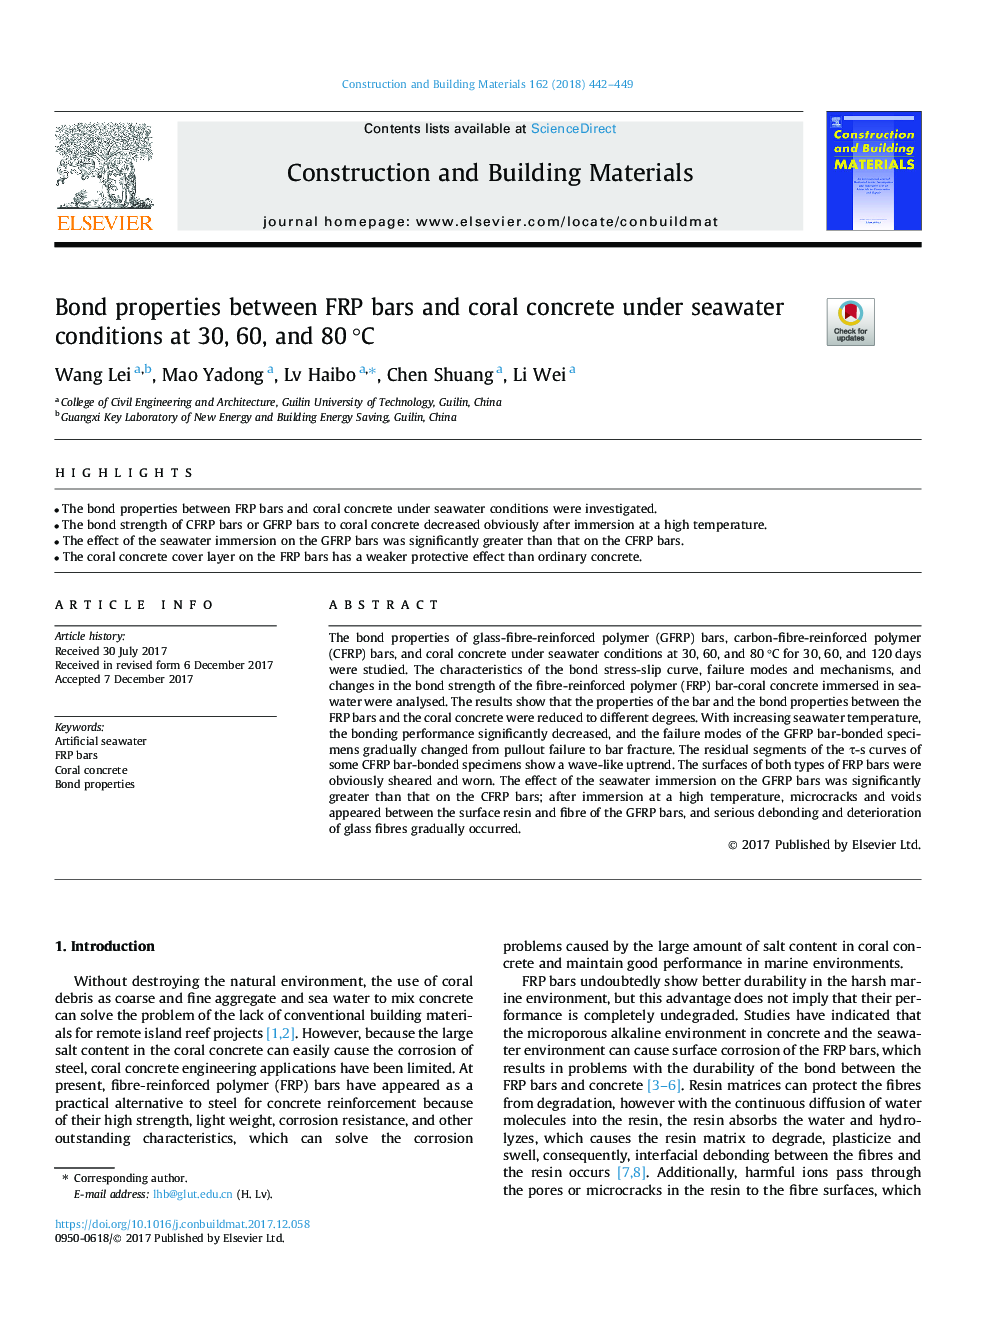 Bond properties between FRP bars and coral concrete under seawater conditions at 30, 60, and 80â¯Â°C